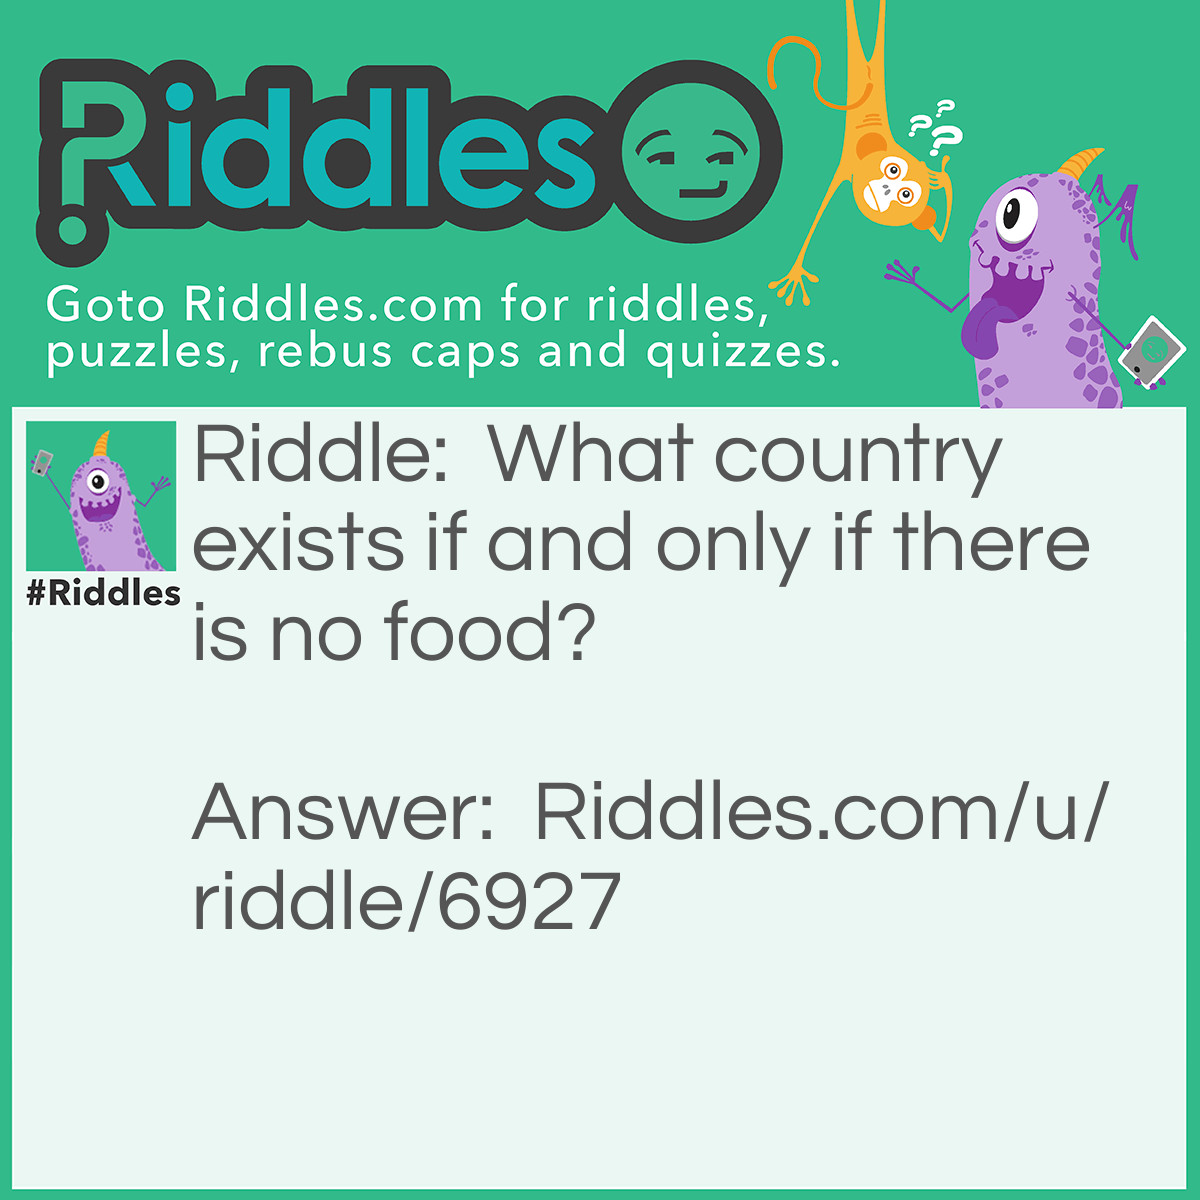 Riddle: What country exists if and only if there is no food? Answer: The country HUNGARY (hungry).